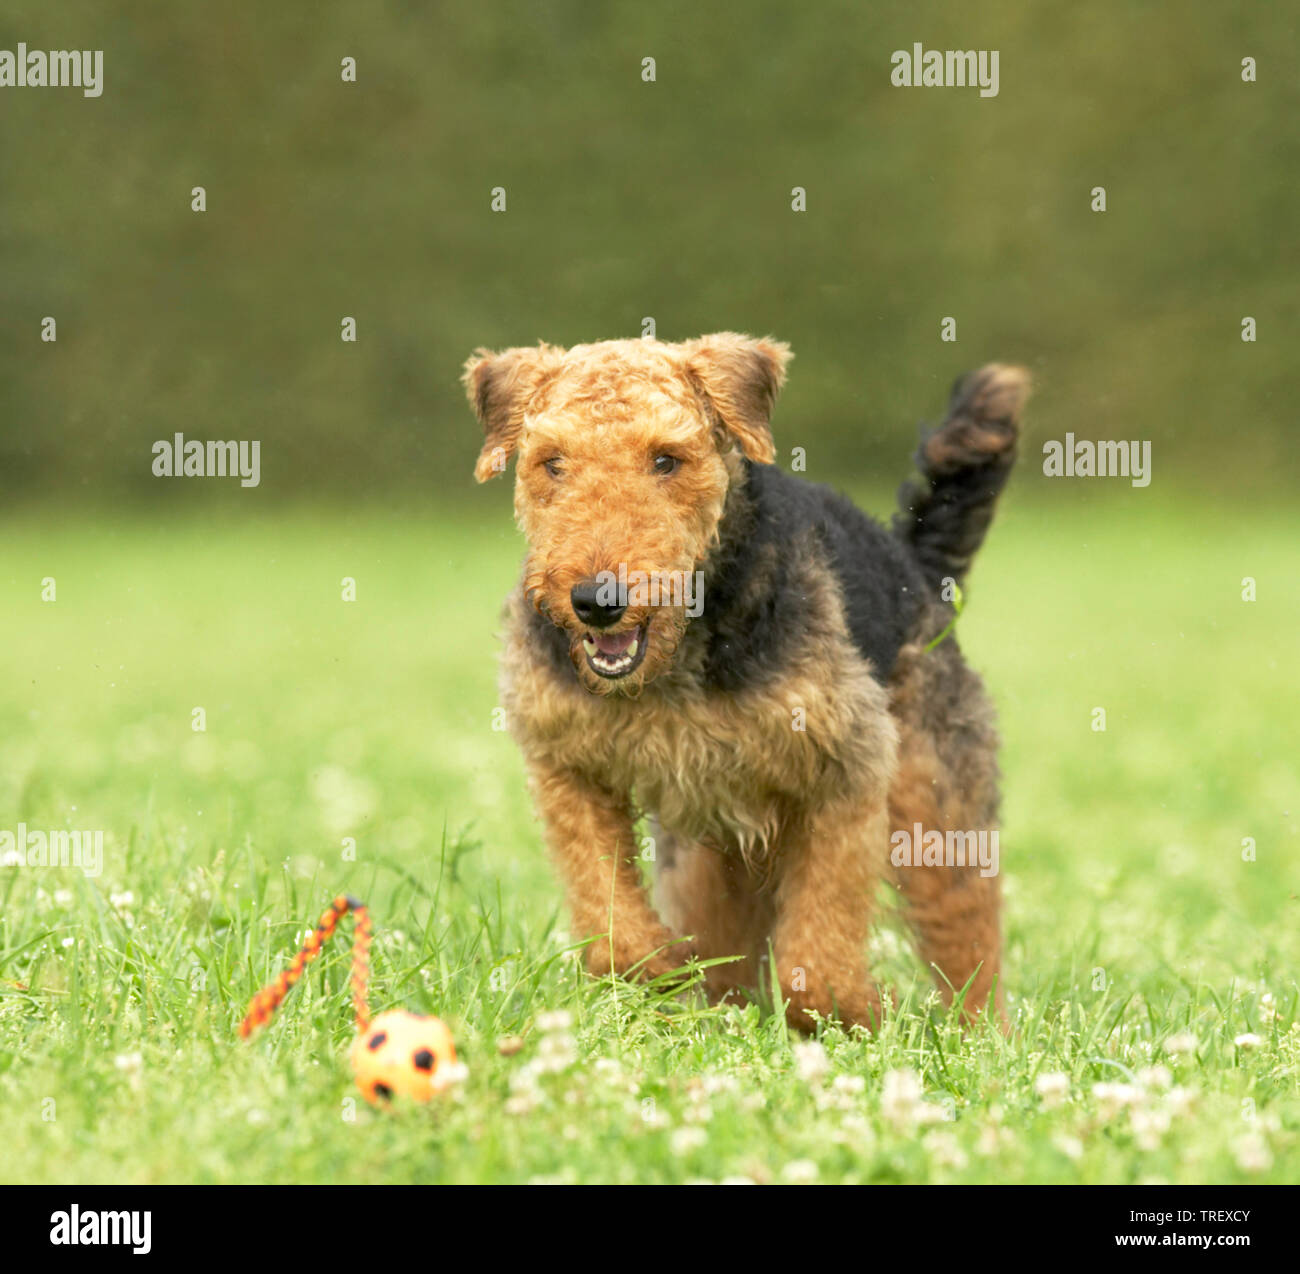 Airedale Terrier. Adult running towards a small ball. Germany Stock Photo